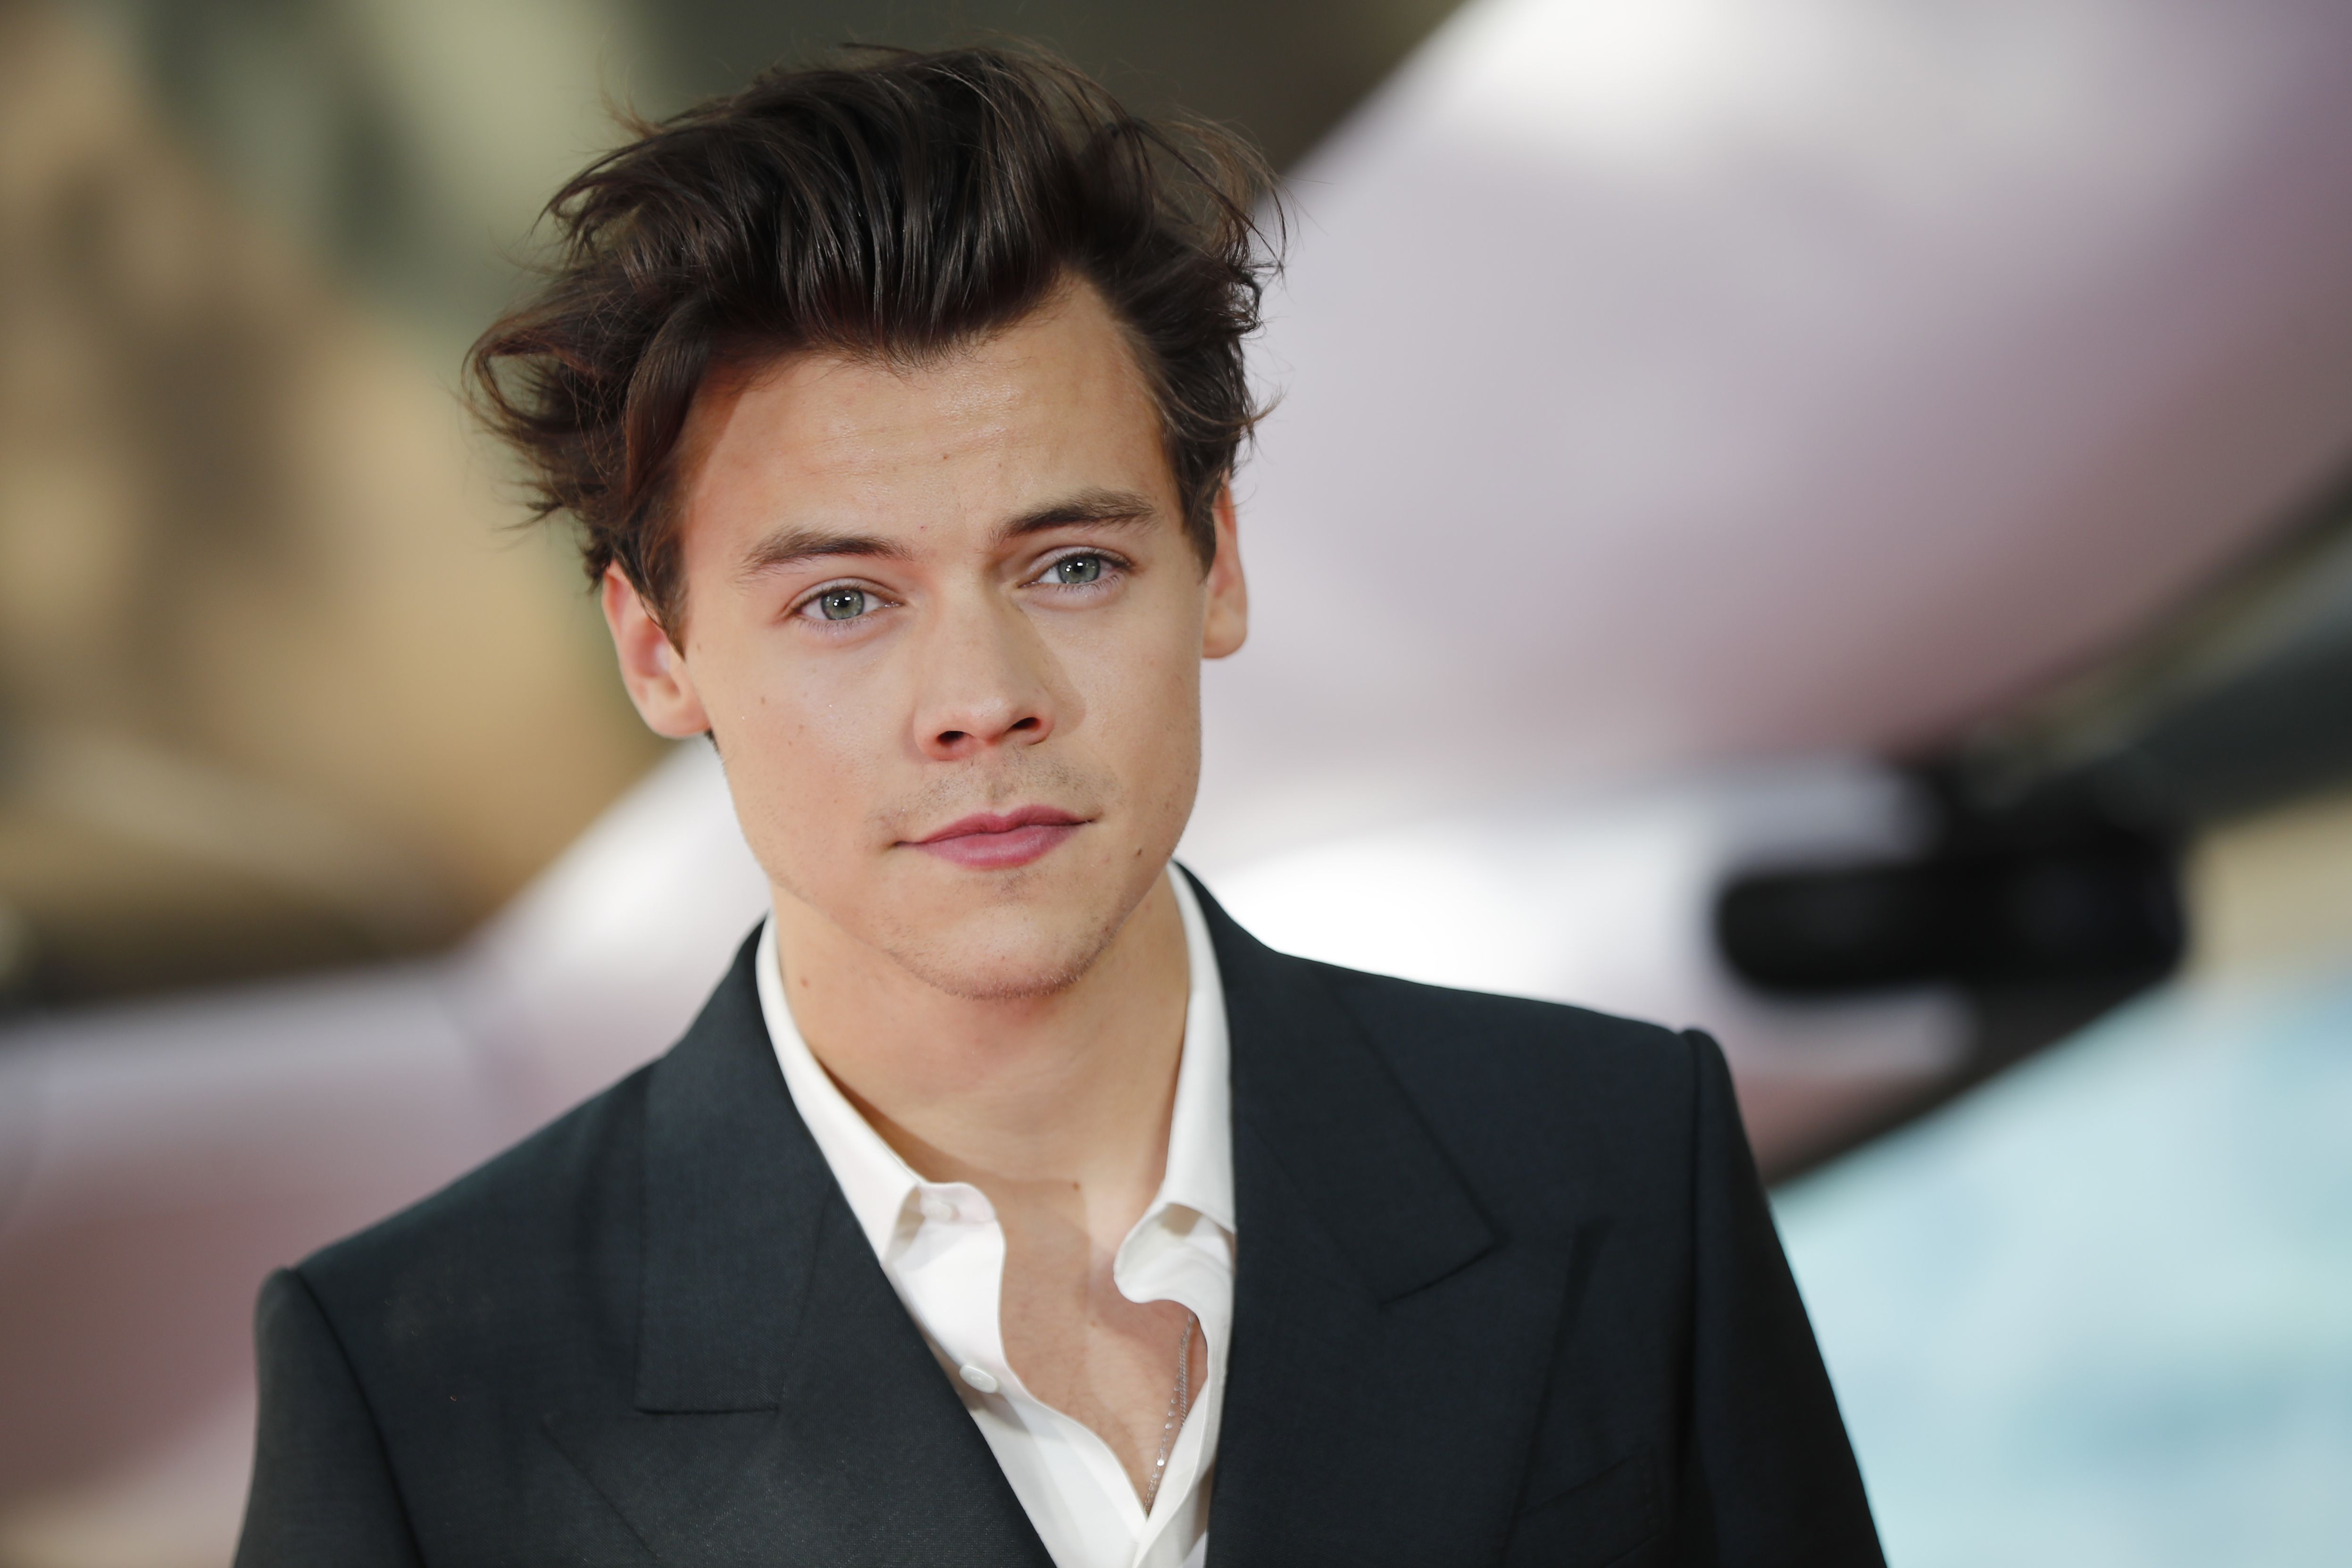 Harry Styles Cuts His Hair Short Ahead Of 'Don't Worry Darling' Filming -  Capital